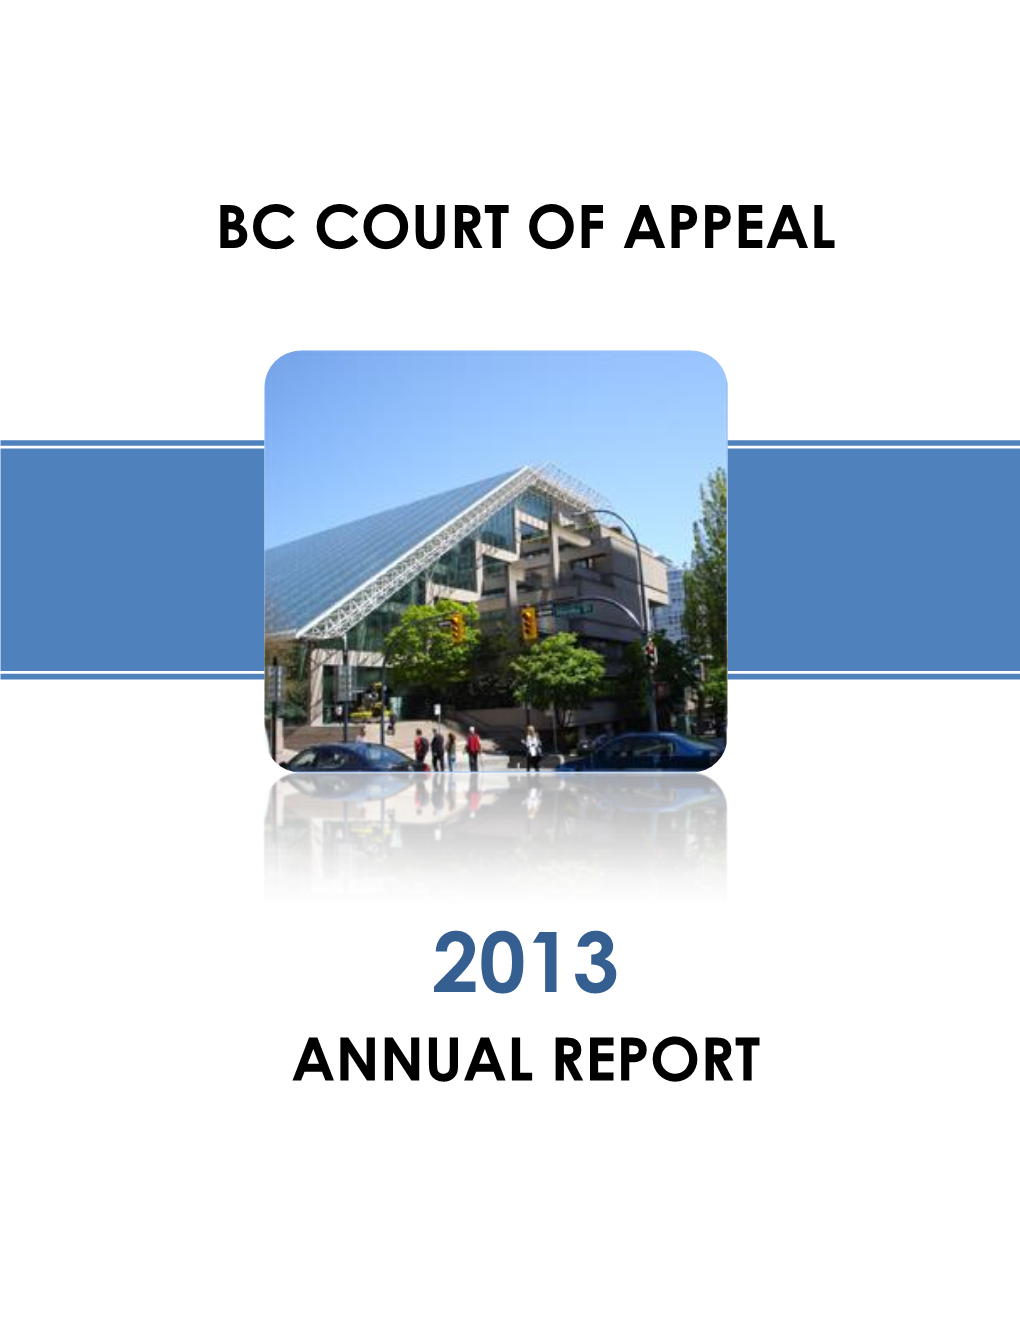 Bc Court of Appeal Annual Report